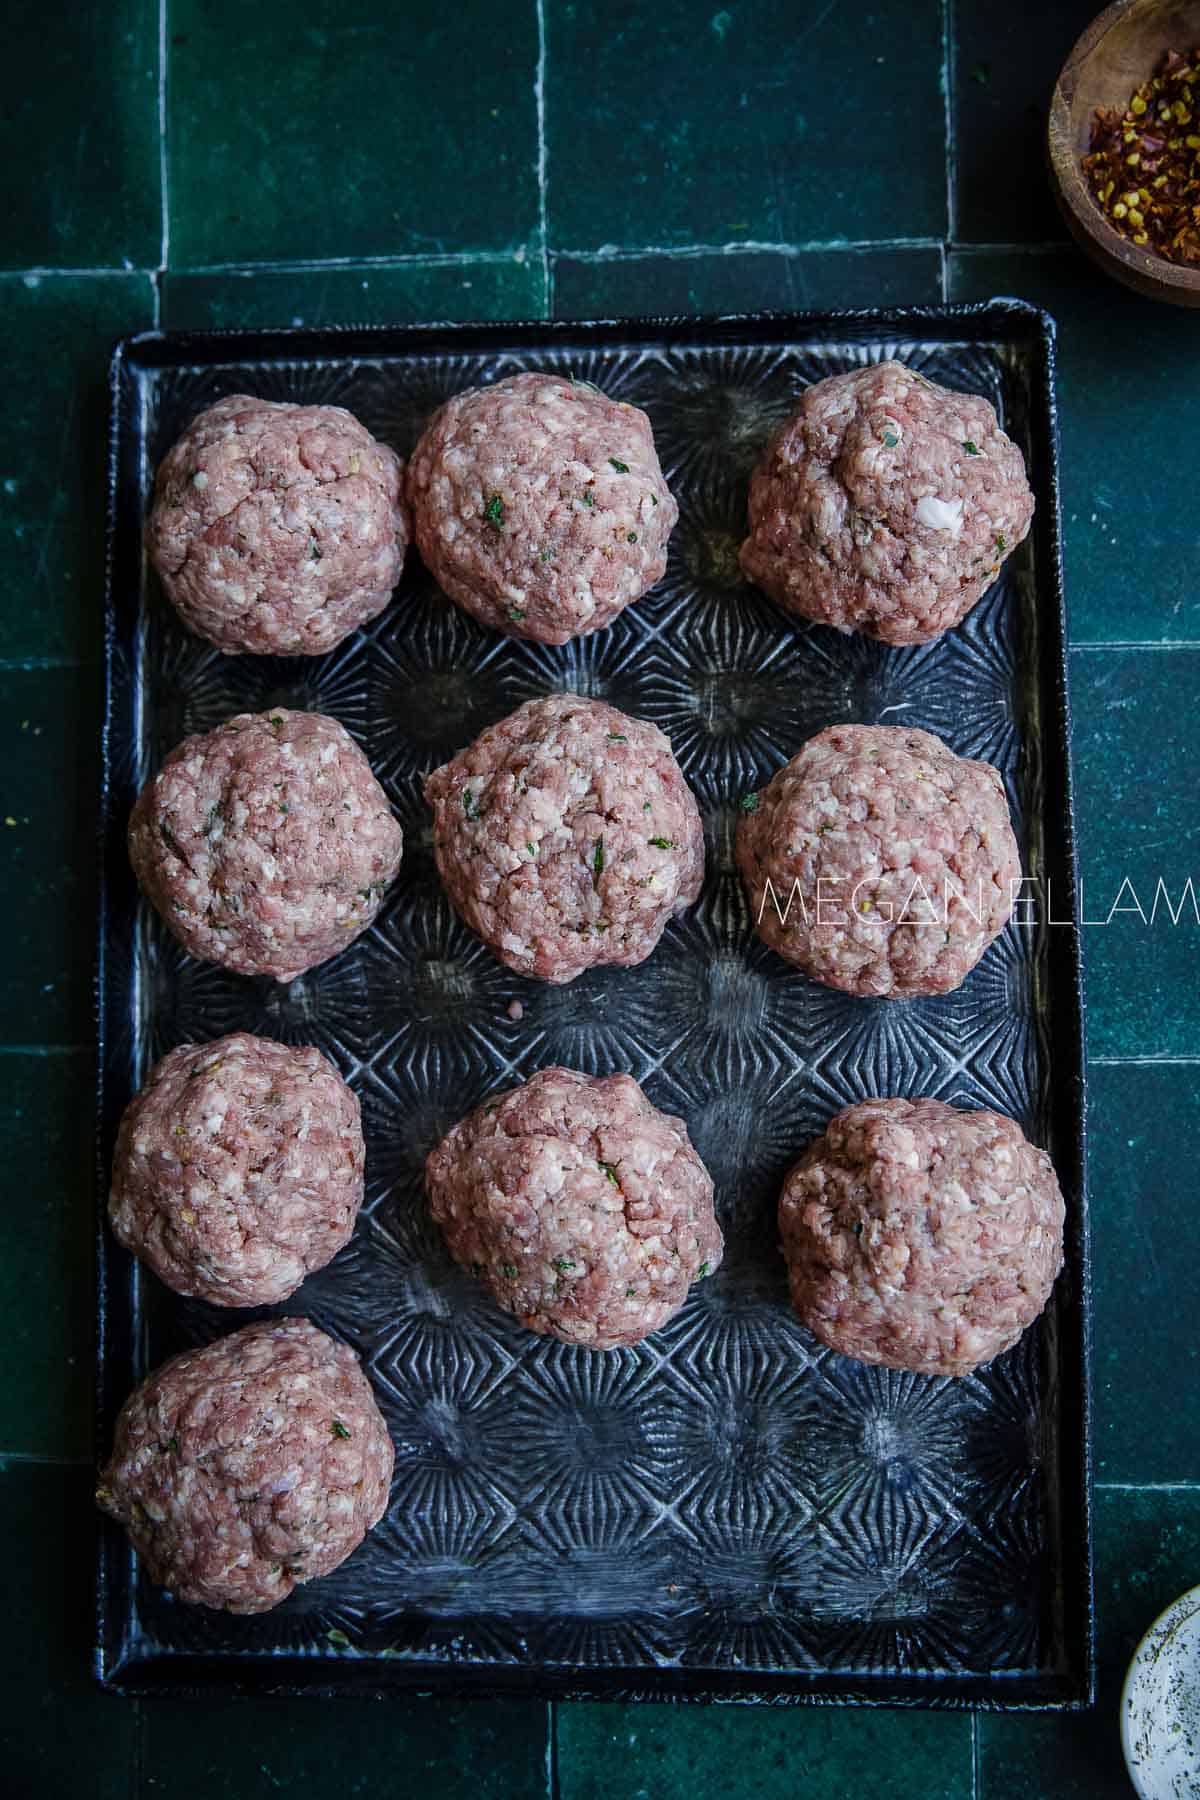 Meat balls on a large baking tray.